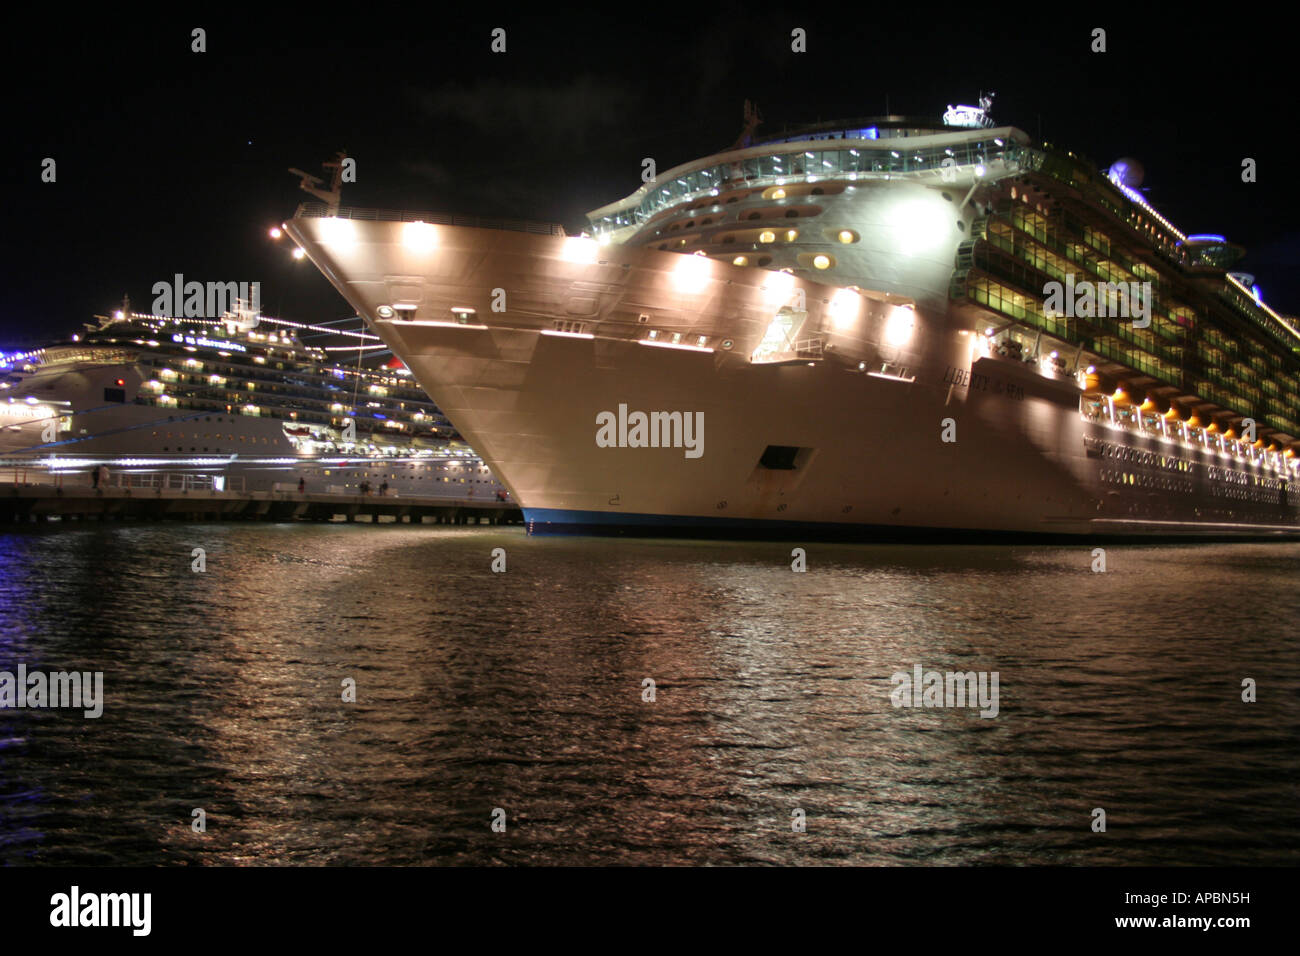 Cruise ship docked in port at night Stock Photo